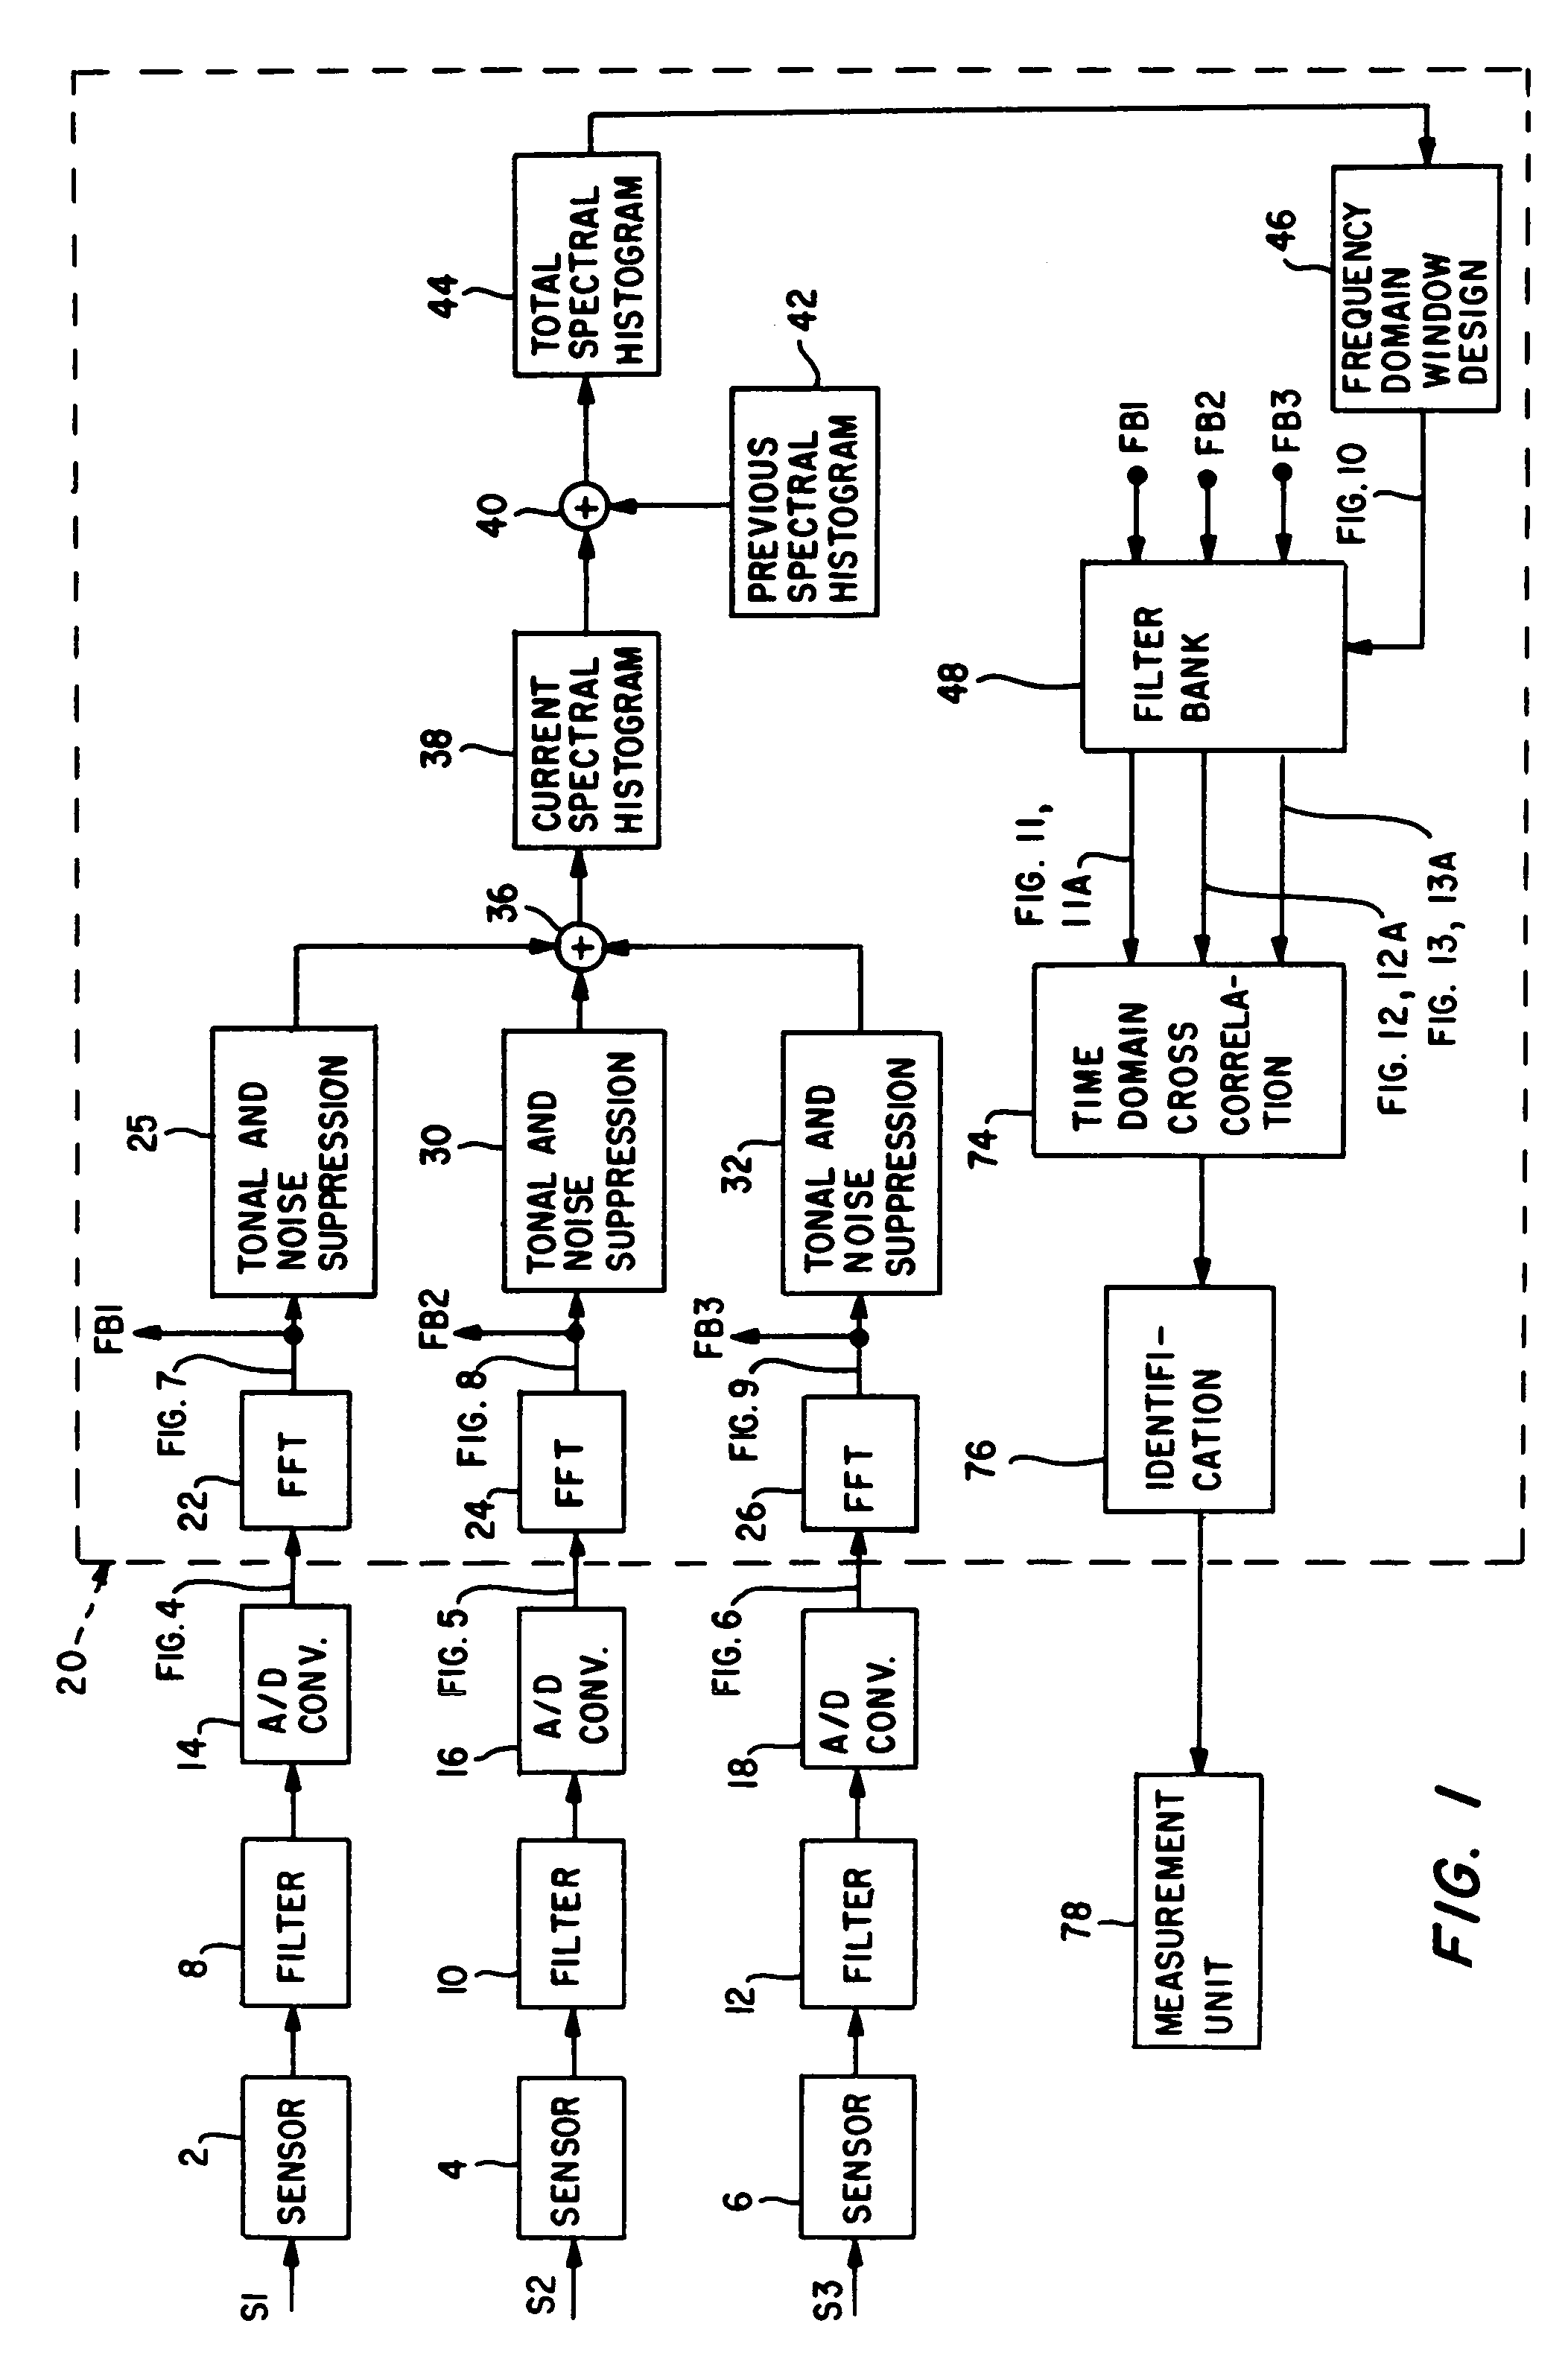 Method for detecting emitted acoustic signals including signal to noise ratio enhancement